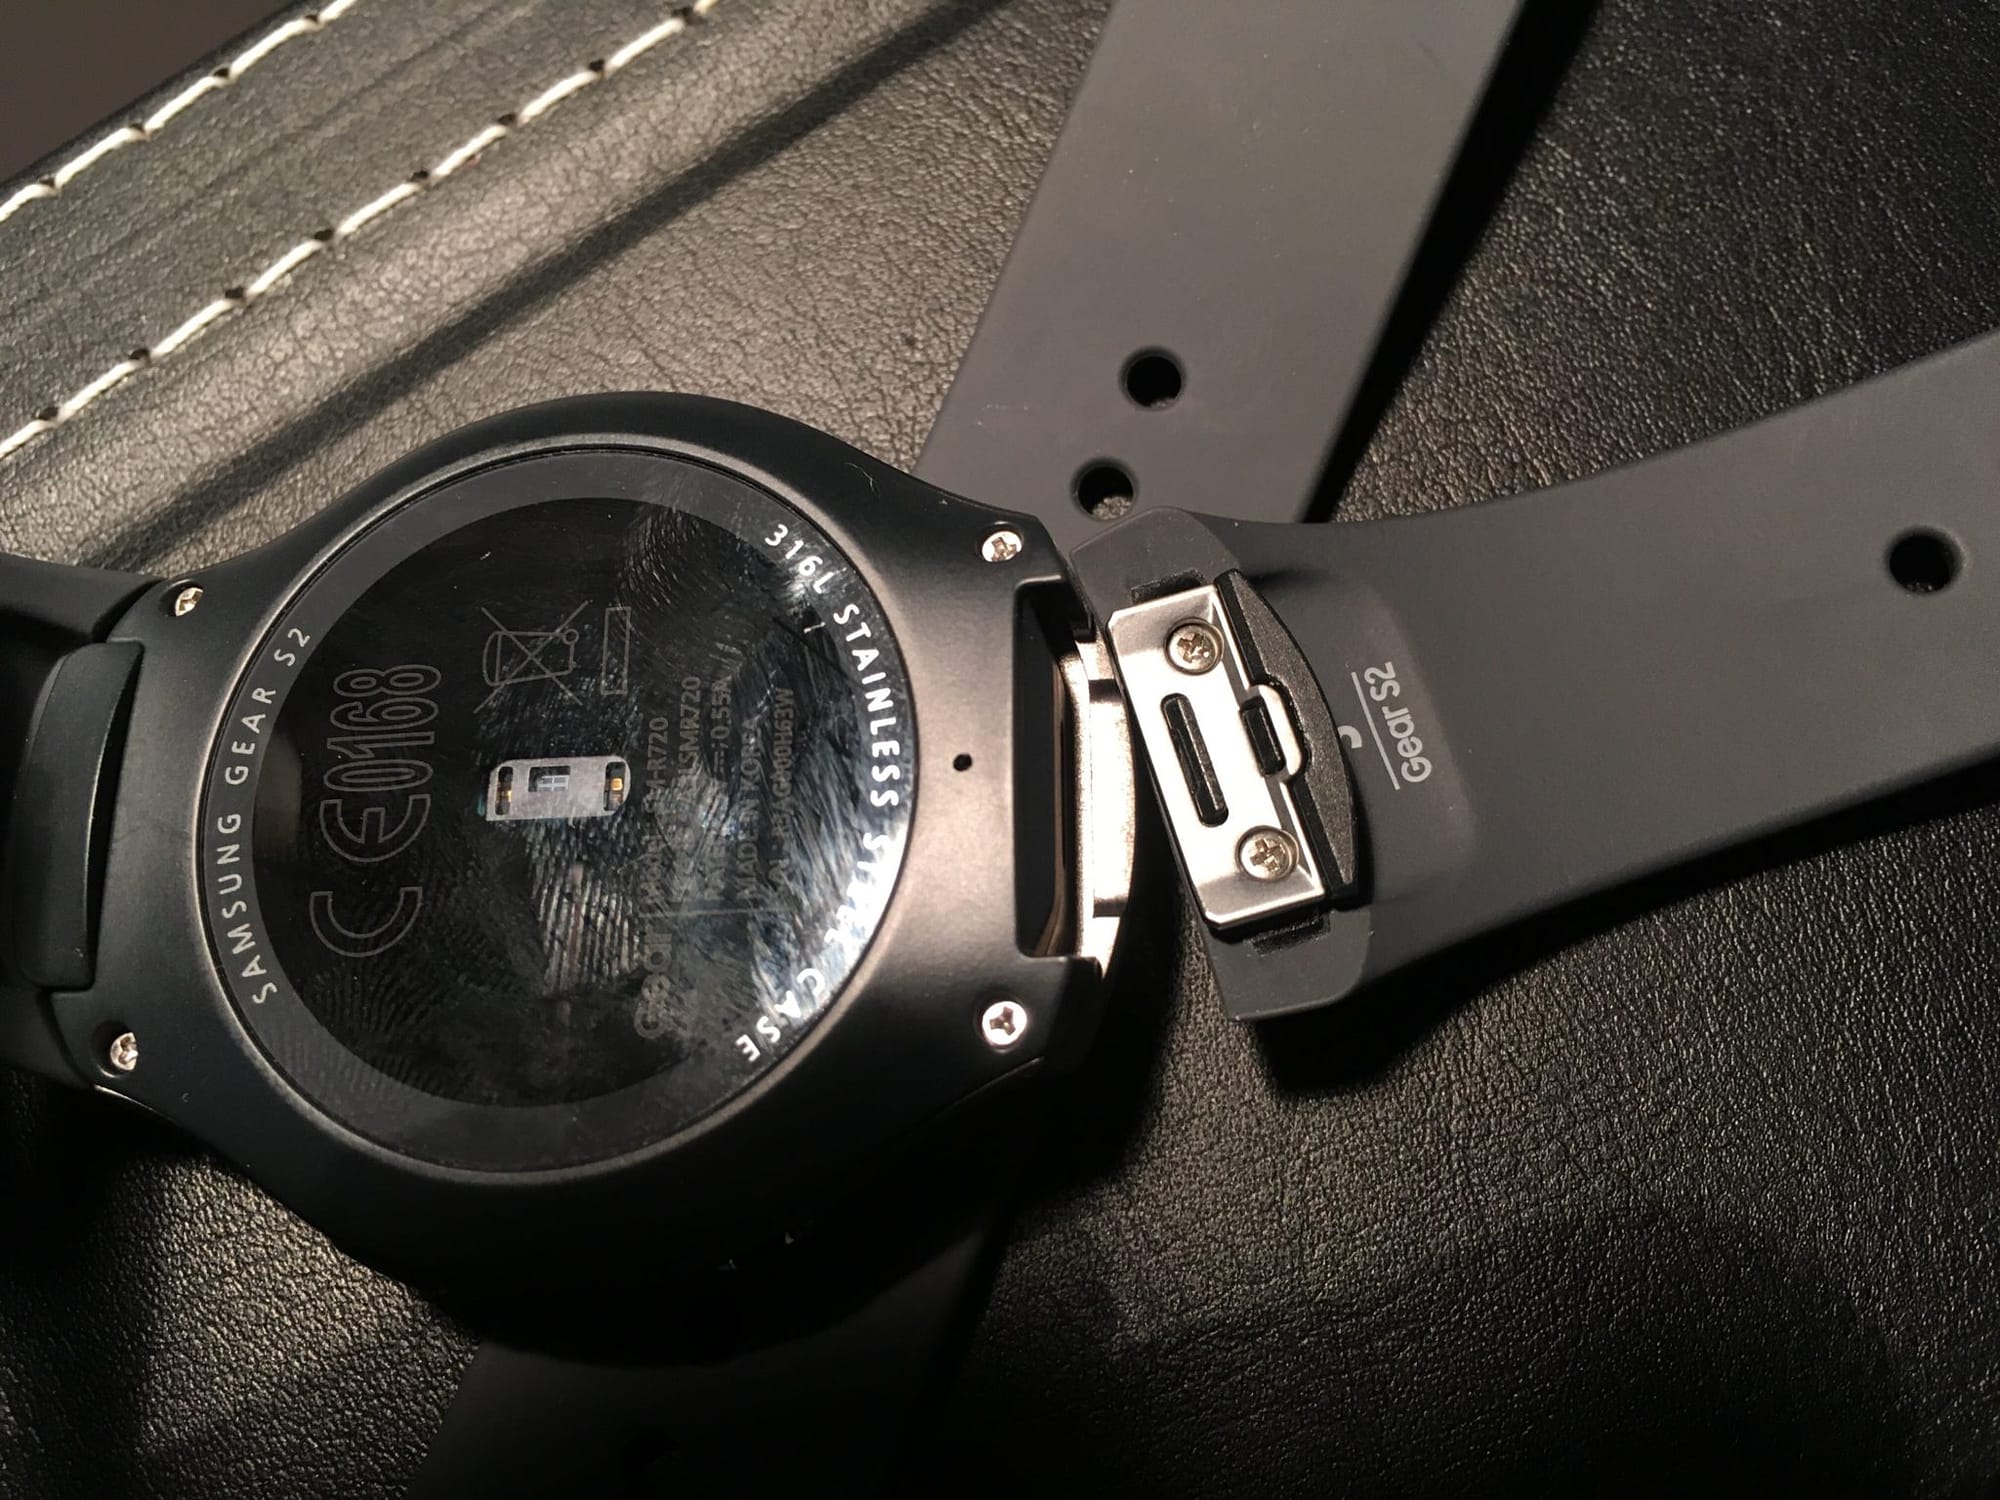 Gear S2 bands removal clip